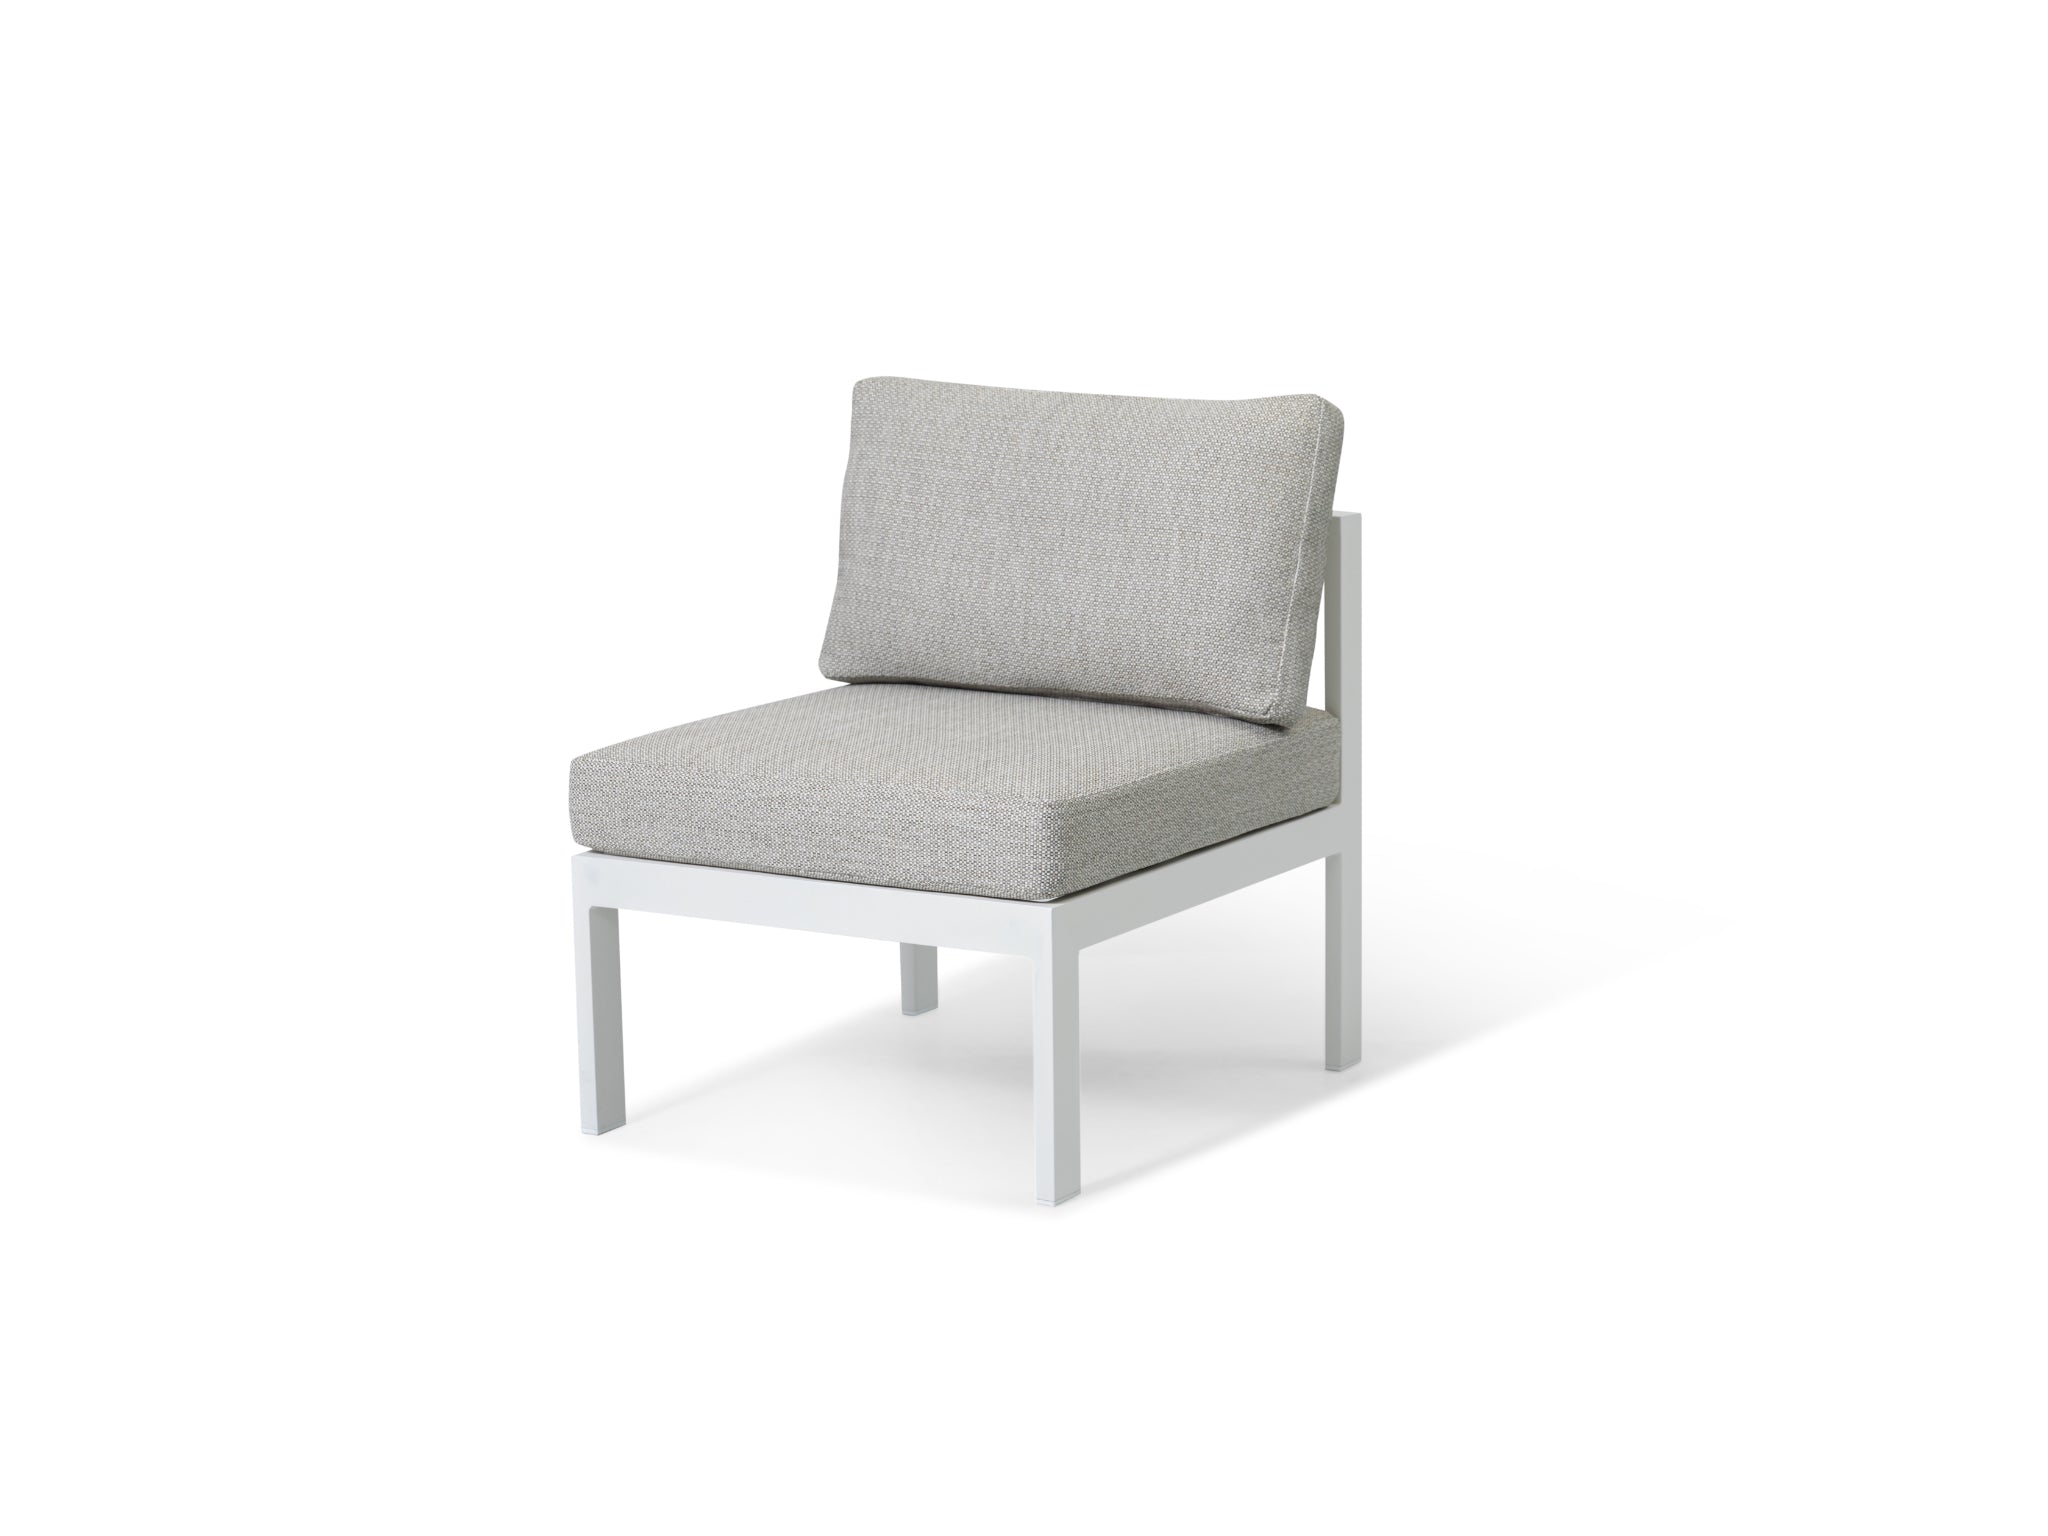 SIMPO by Sunlongarden Aegean Middle Seat